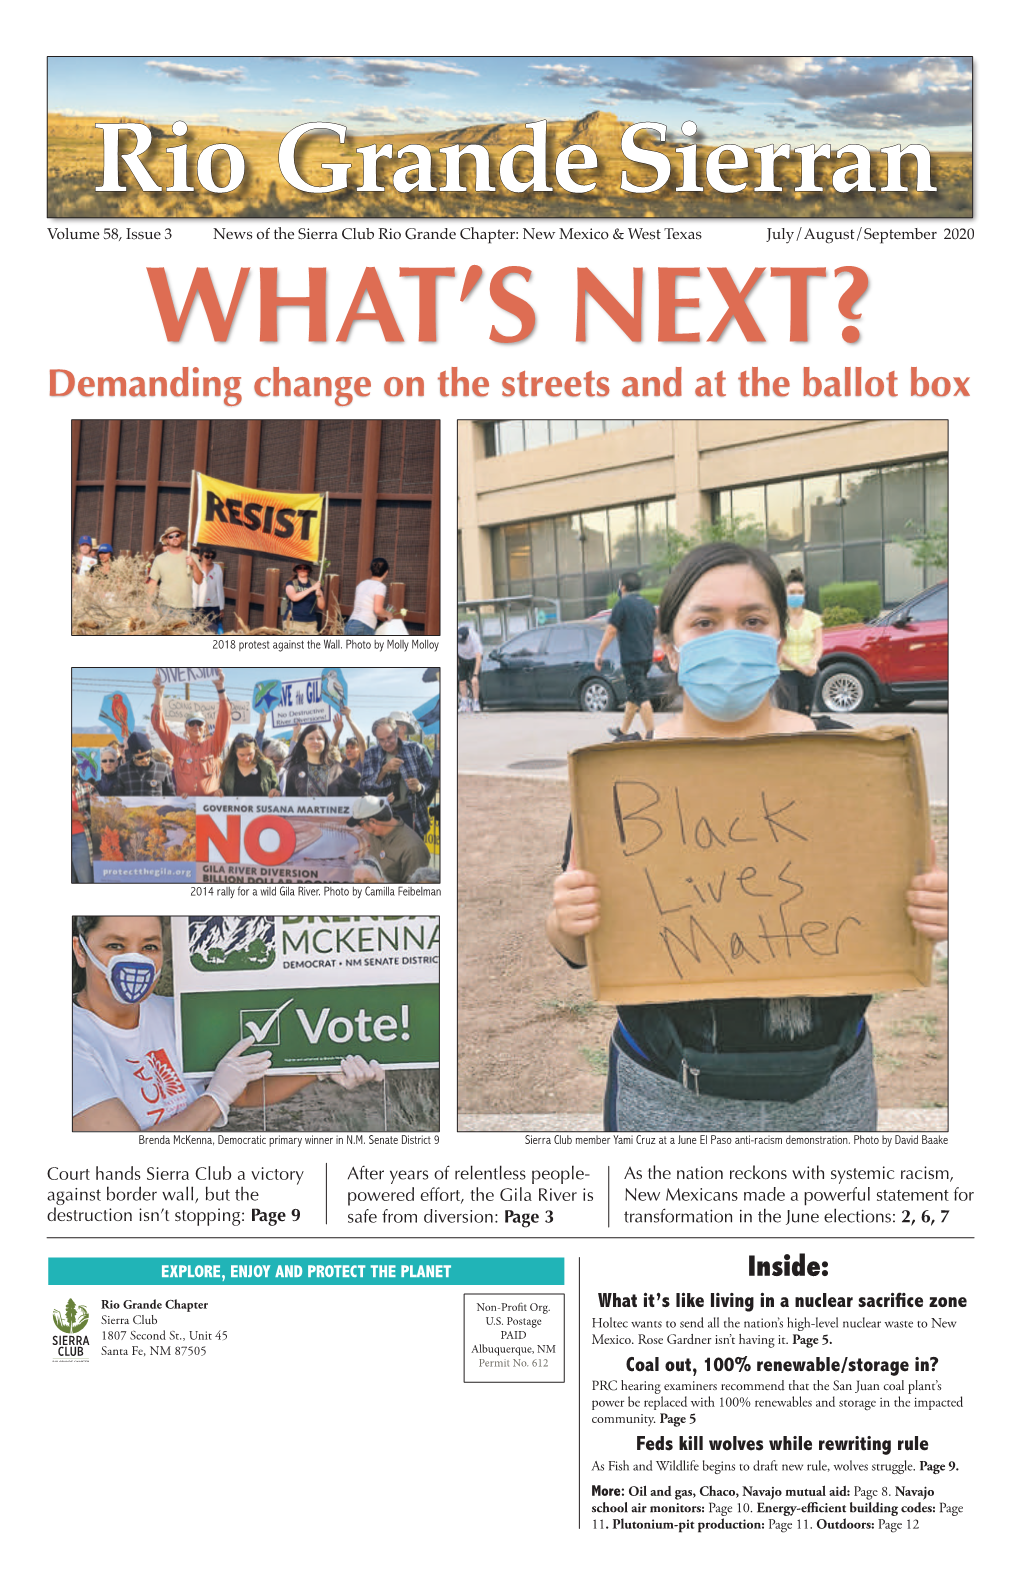 July/August/September 2020 WHAT’S NEXT? Demanding Change on the Streets and at the Ballot Box